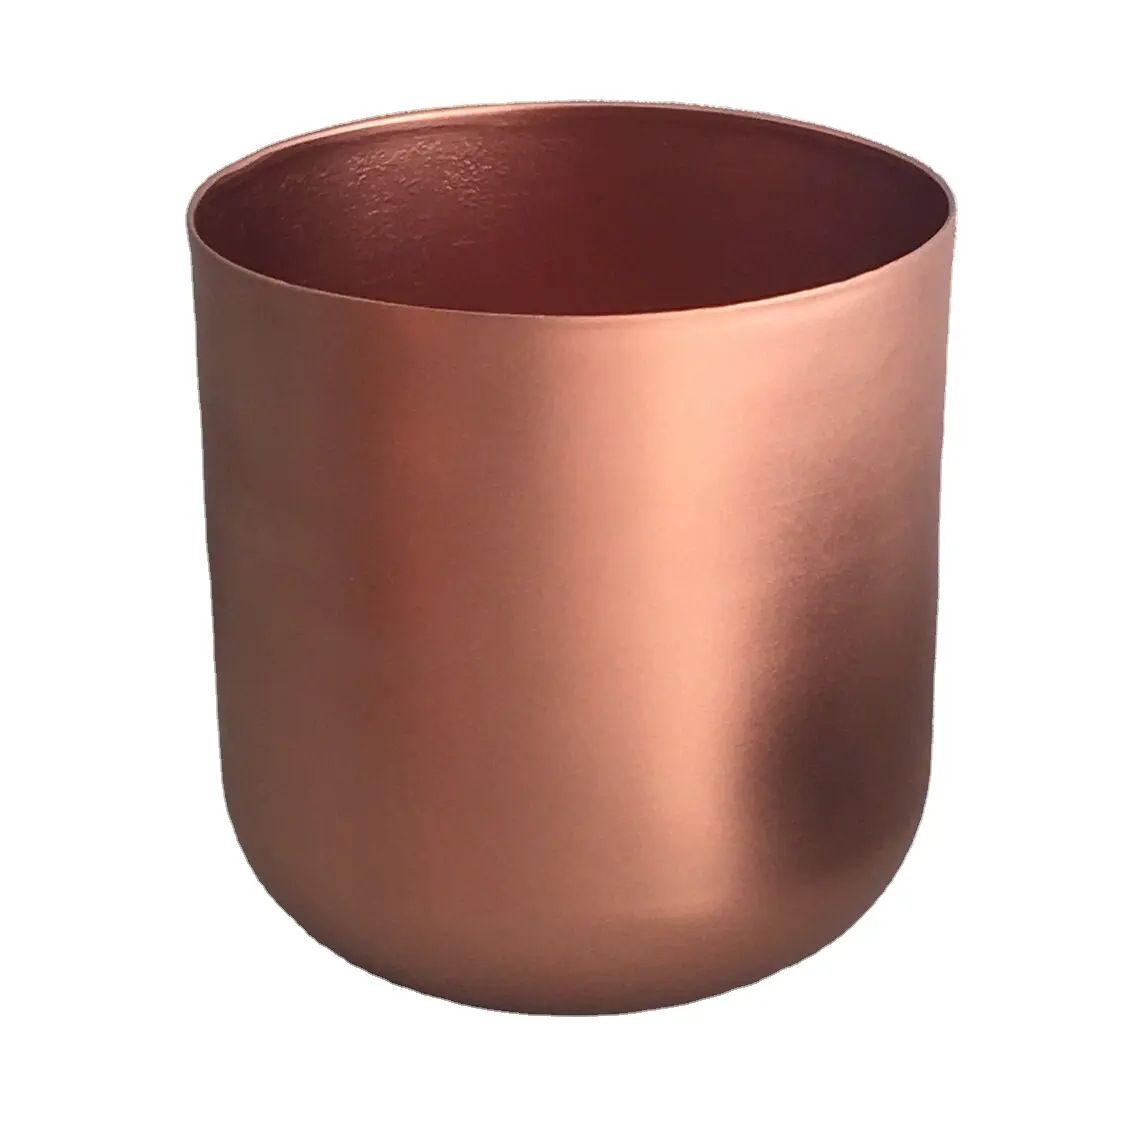 Super Quality Metal Large Planter Powder Copper Antique Indoor And Outdoor Planter With Manufacturing at Wholesale Price